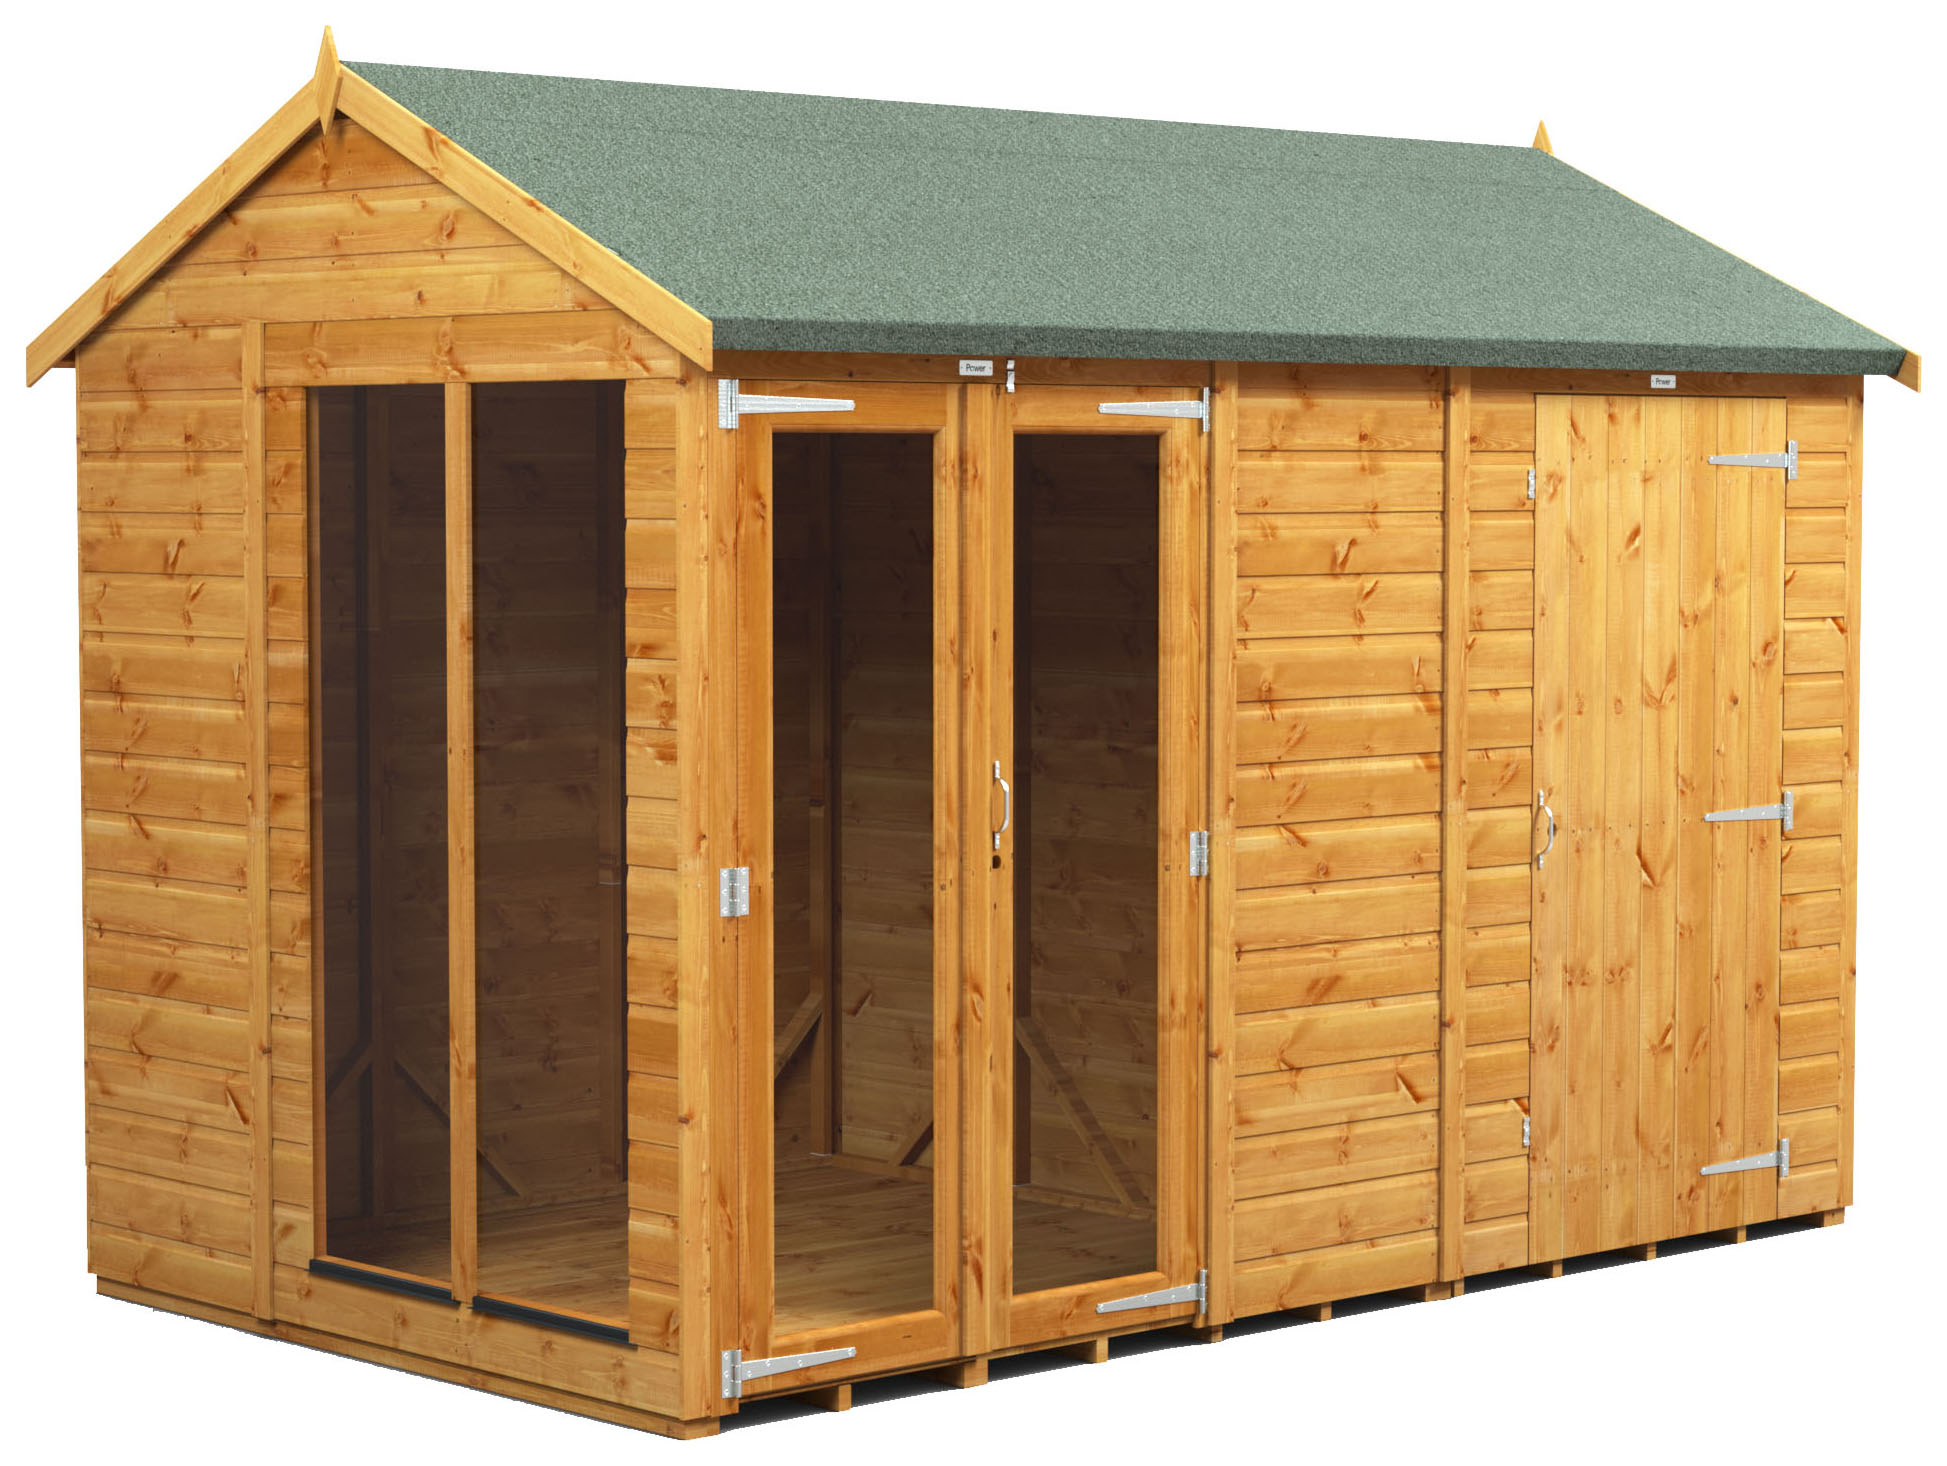 Image of Power Sheds 10 x 6ft Apex Shiplap Dip Treated Summerhouse - Including 4ft Side Store